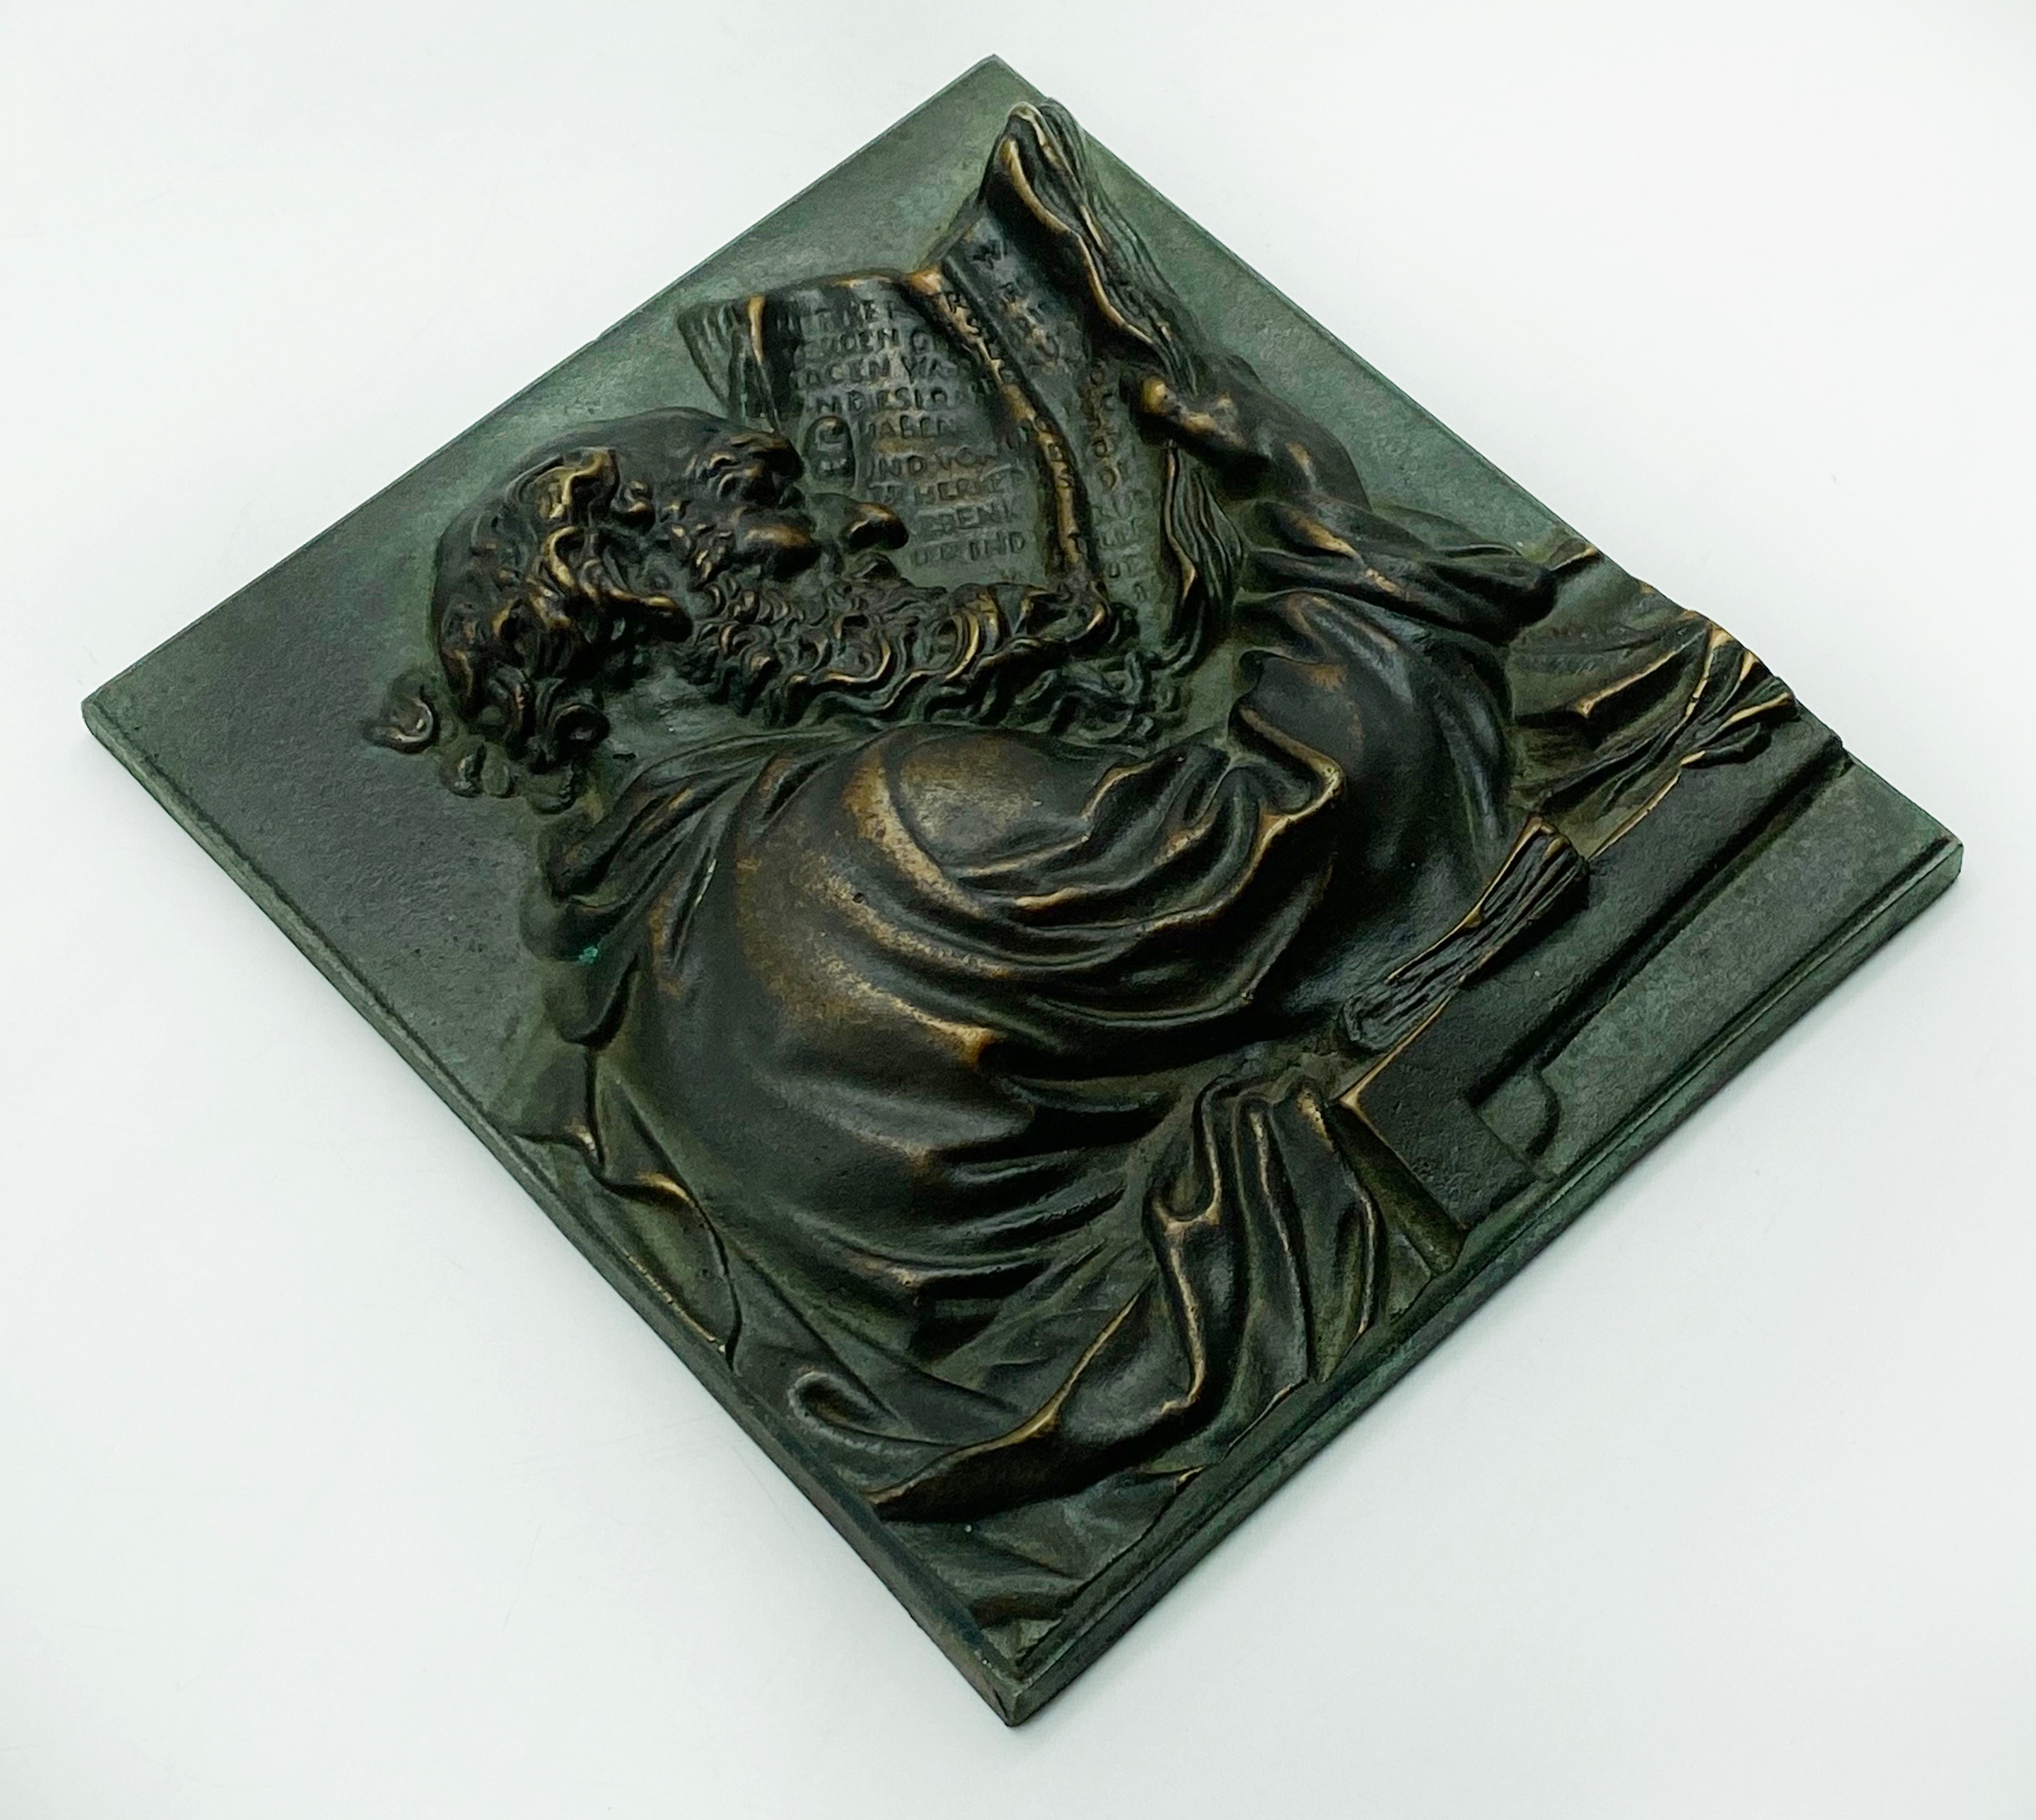 METAL BRONZE RELIEF OF A MAN READING - Image 2 of 4